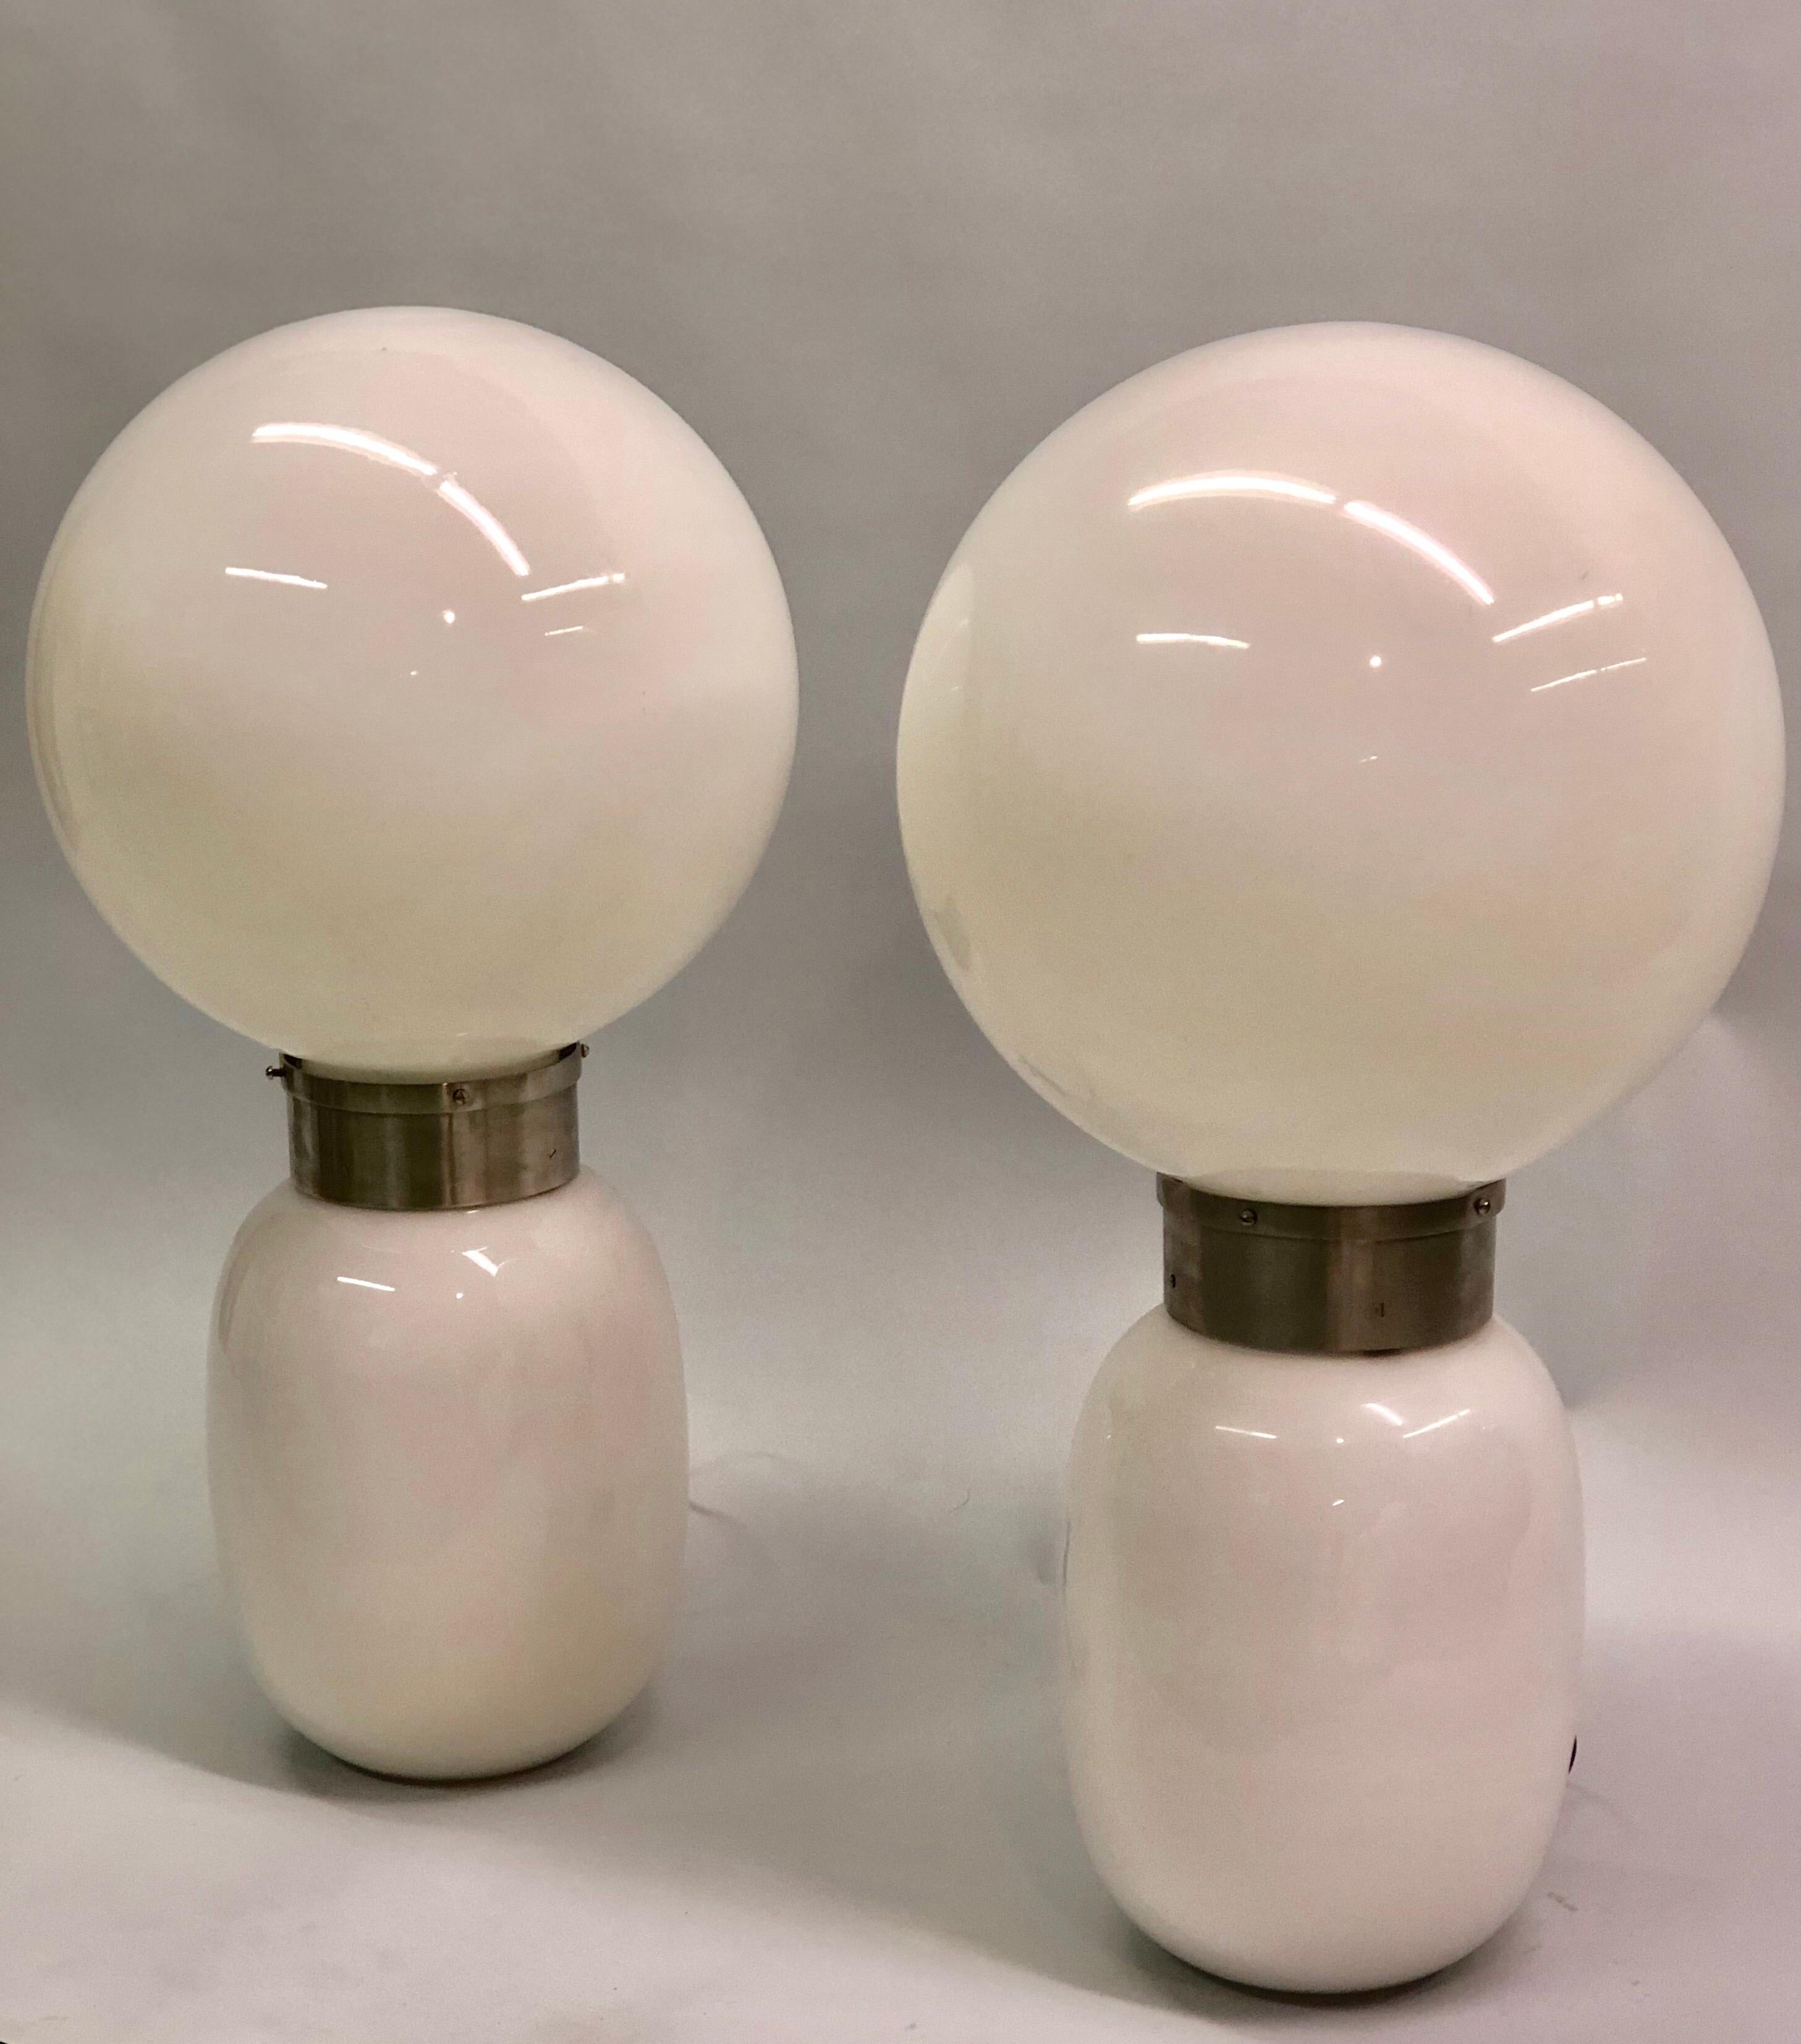 Rare pair of Italian Mid-Century Modern mold blown white Murano milk glass table lamps by Carlo Nason.

The lamps are space age in concept and design and function both practically and as light sculptures with both lower and upper levels illuminating